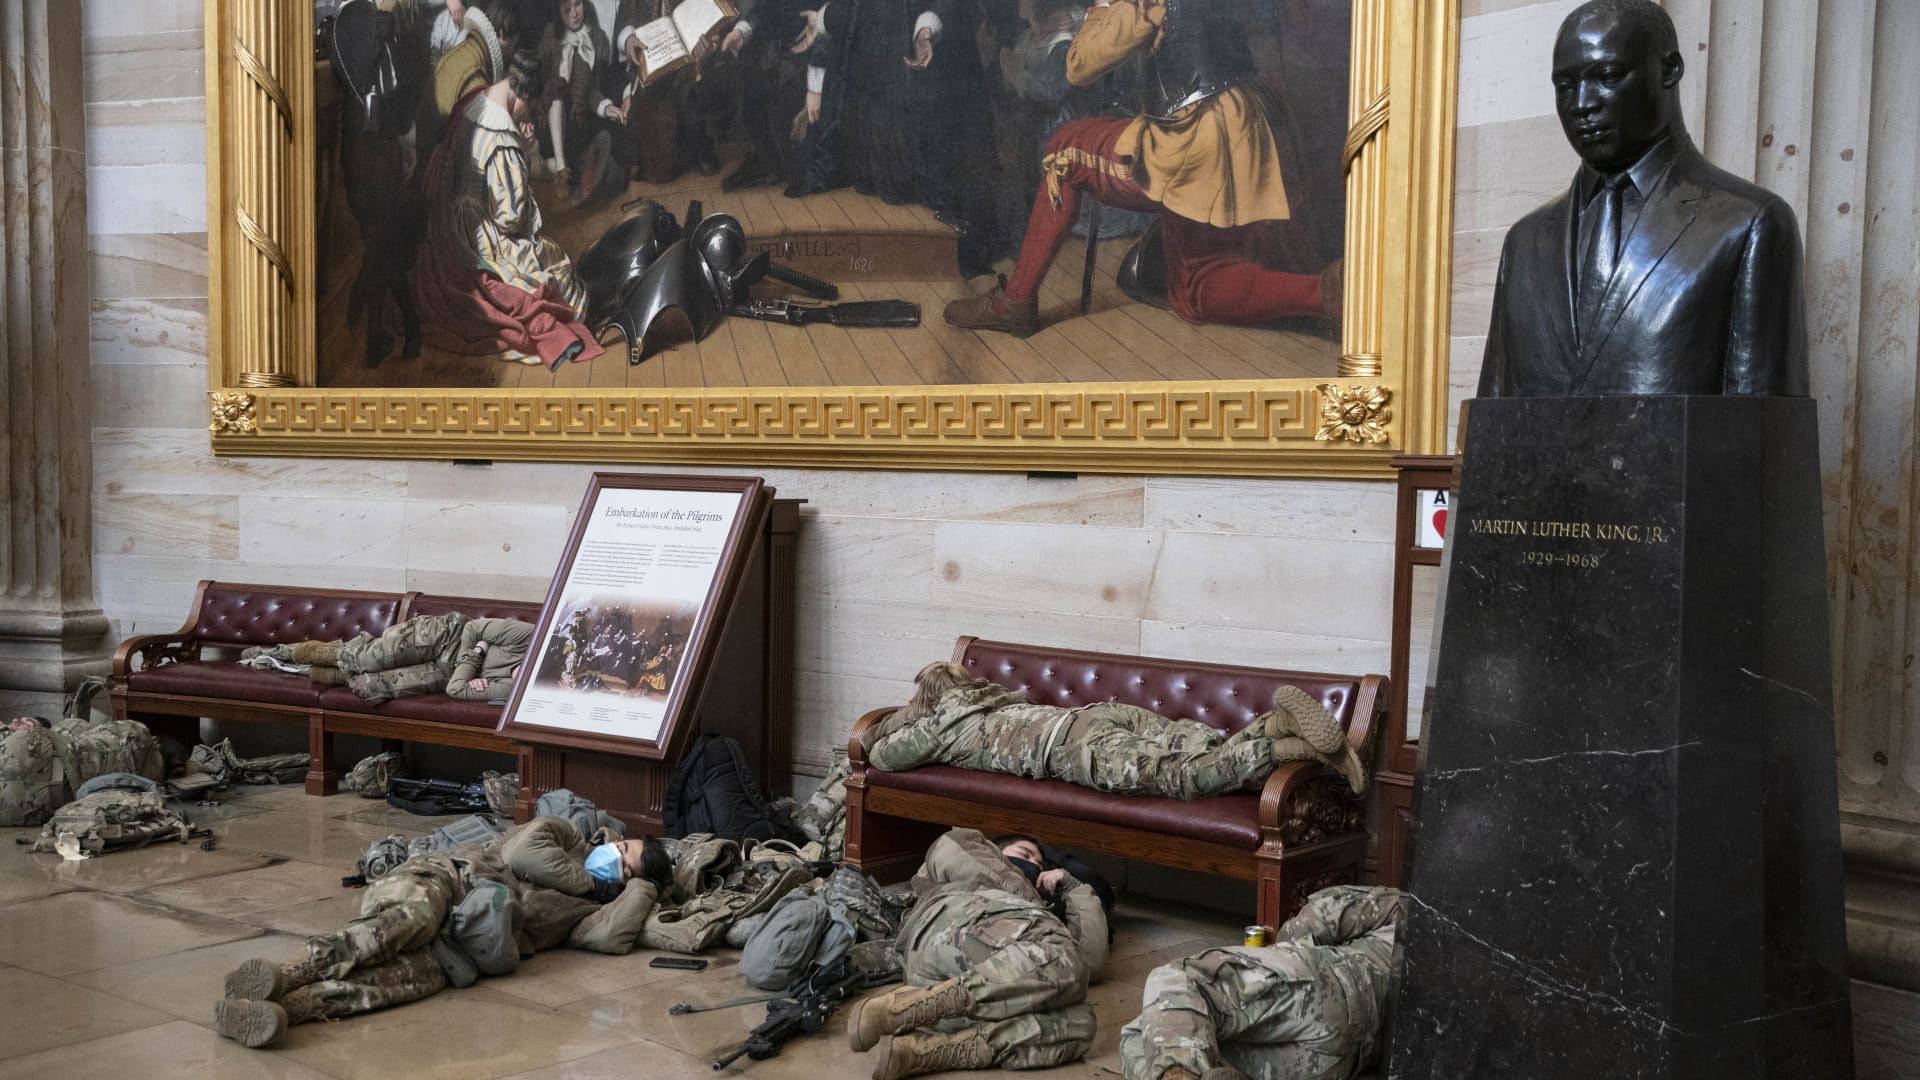 Members of the National Guard rest in the Rotunda of the U.S. Capitol building in Washington, D.C., U.S., on Wednesday, Jan. 13, 2021.